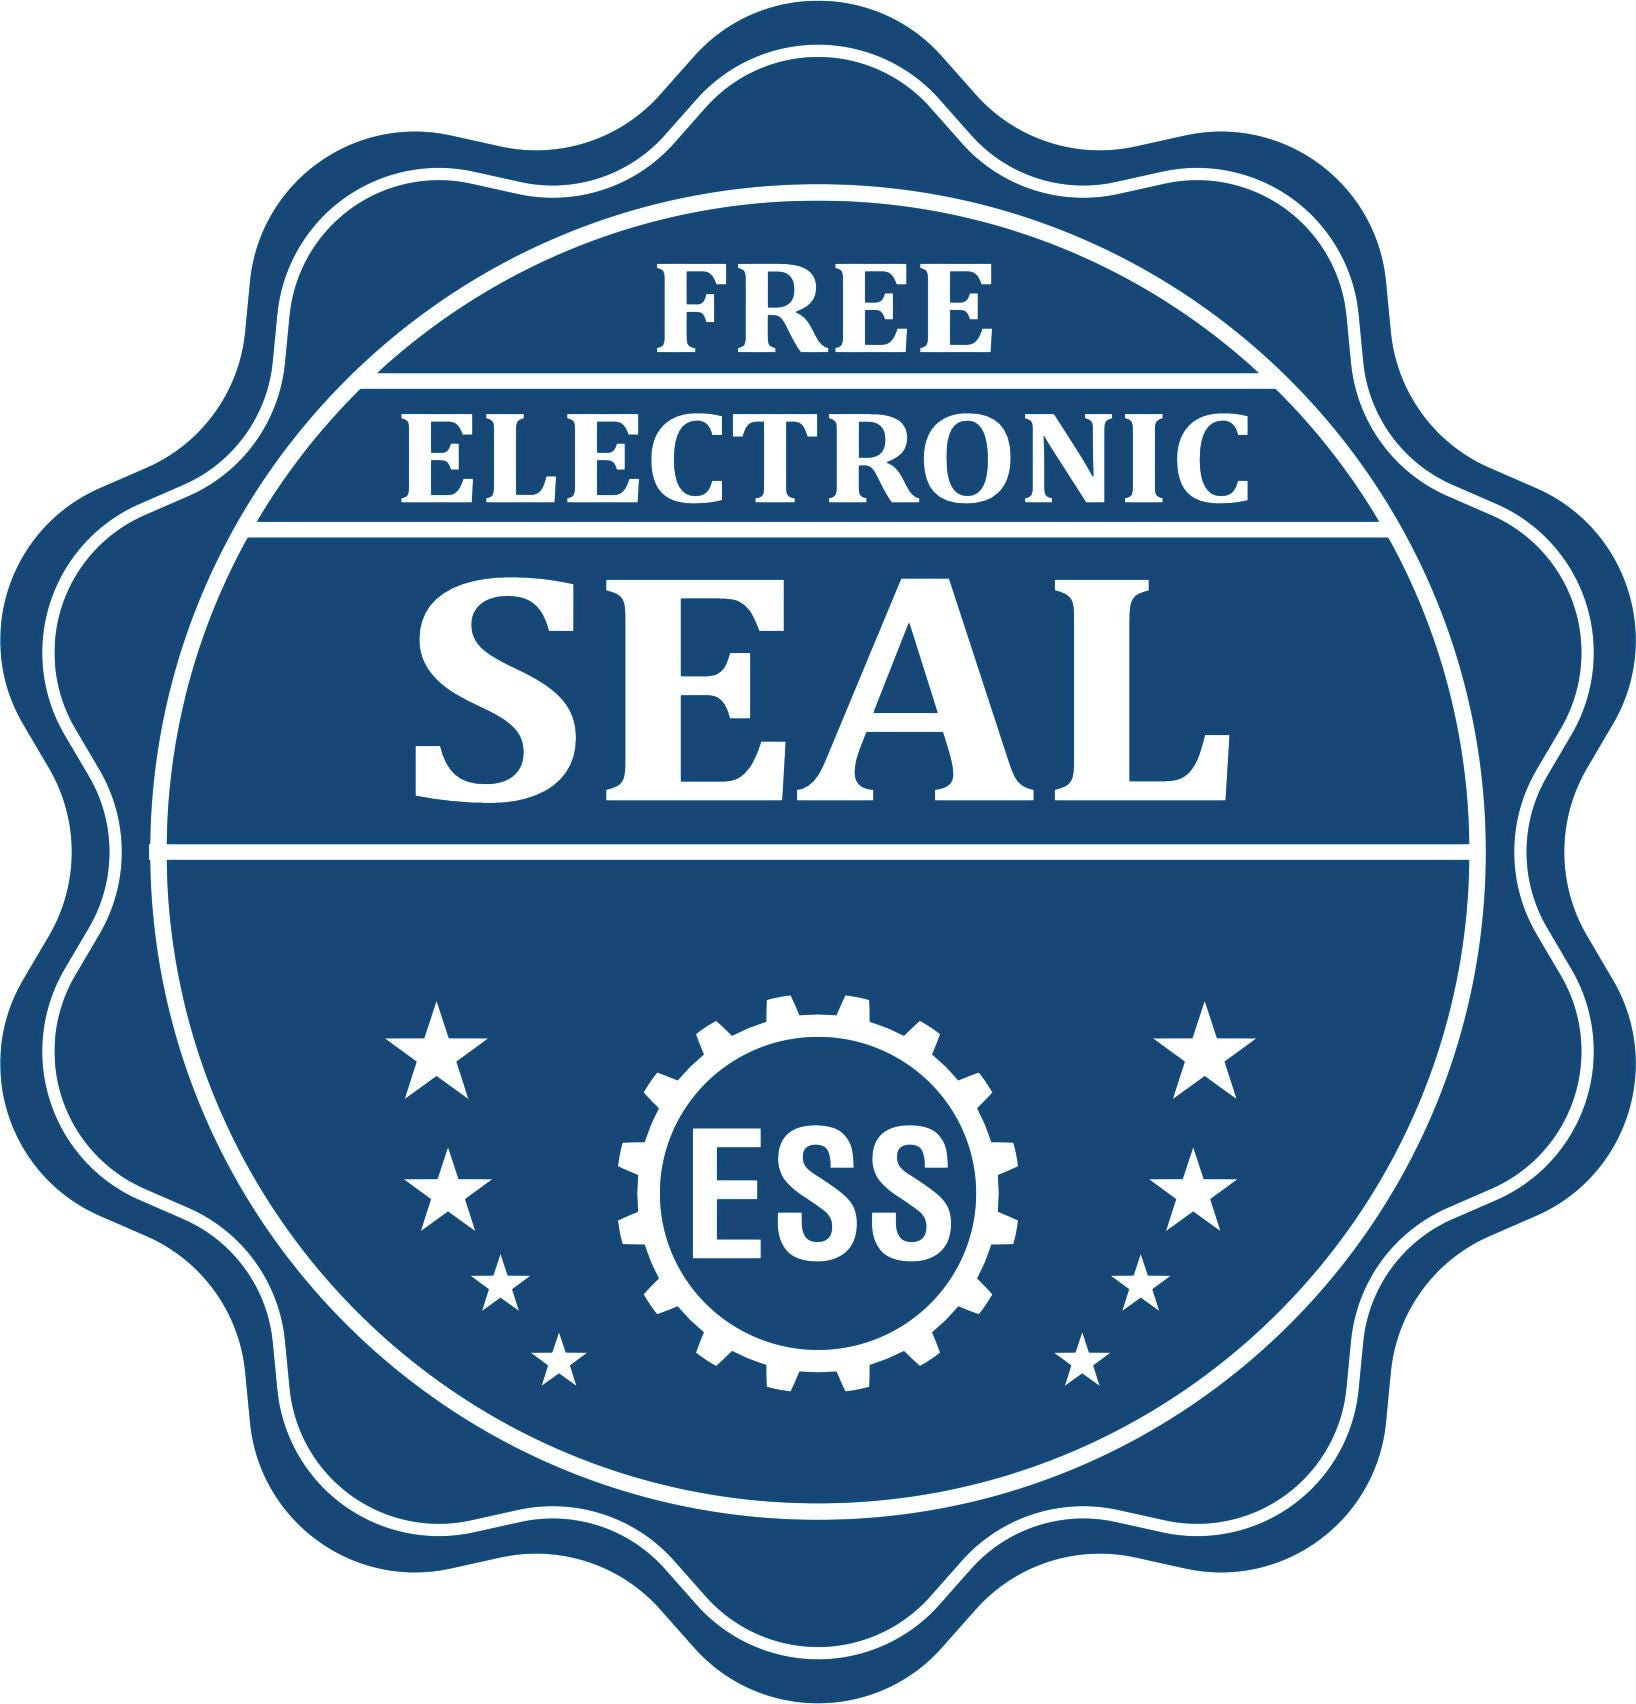 A badge showing a free electronic seal for the Maine Desk Architect Embossing Seal with stars and the ESS gear on the emblem.